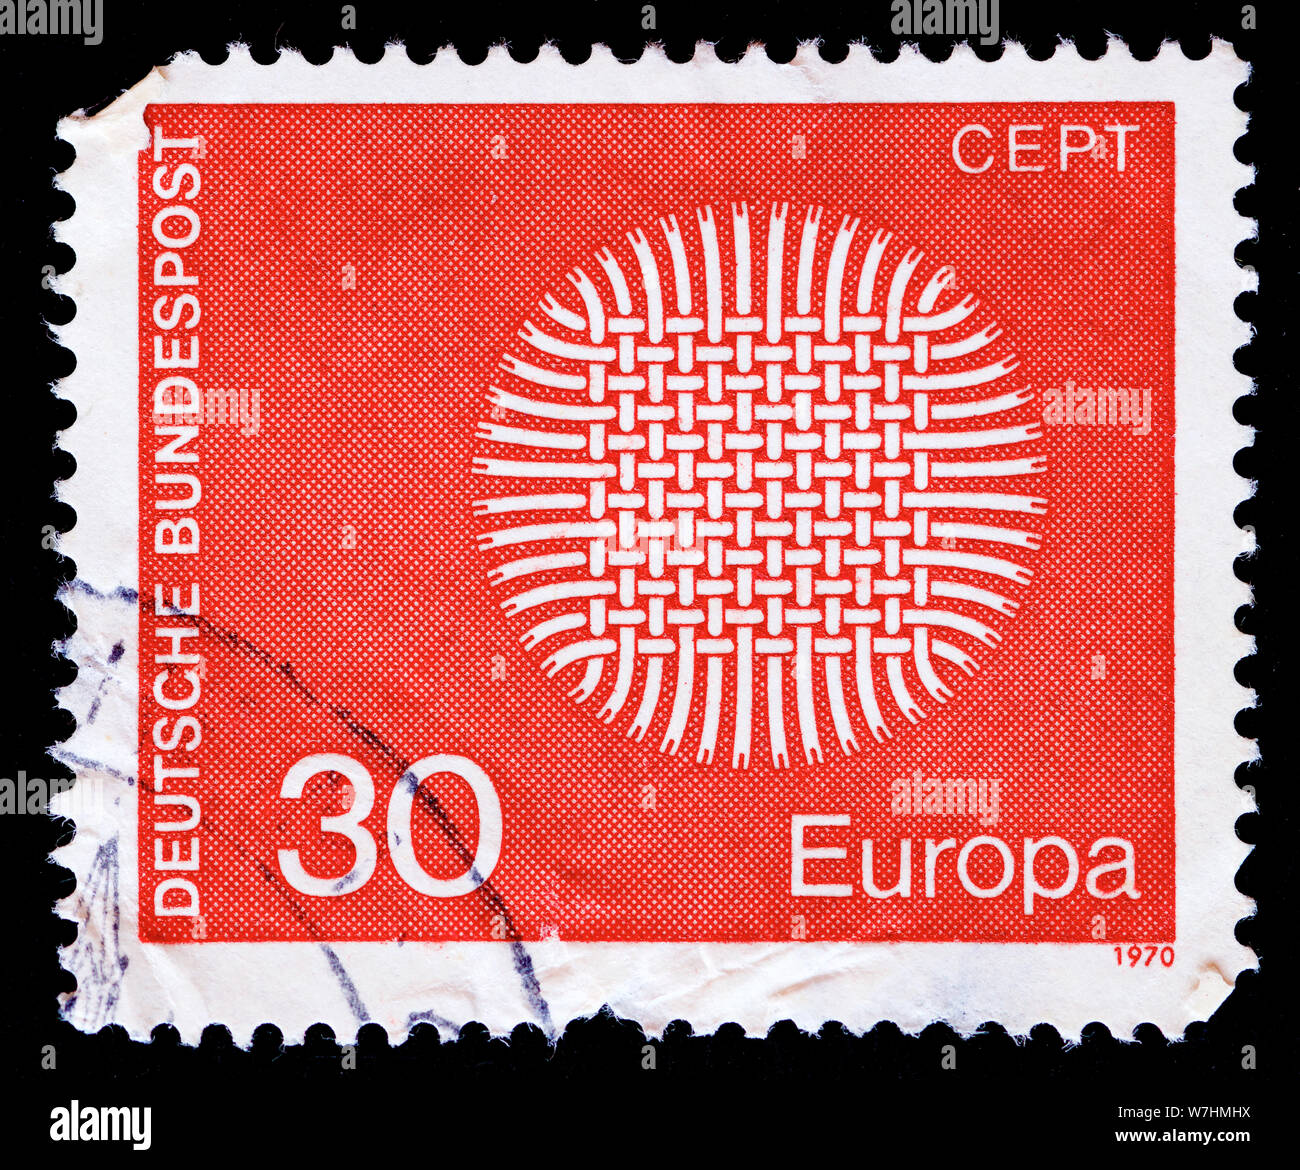 West Germany Postage Stamp - Europa (C.E.P.T.) 1970 - Flaming Sun Stock Photo